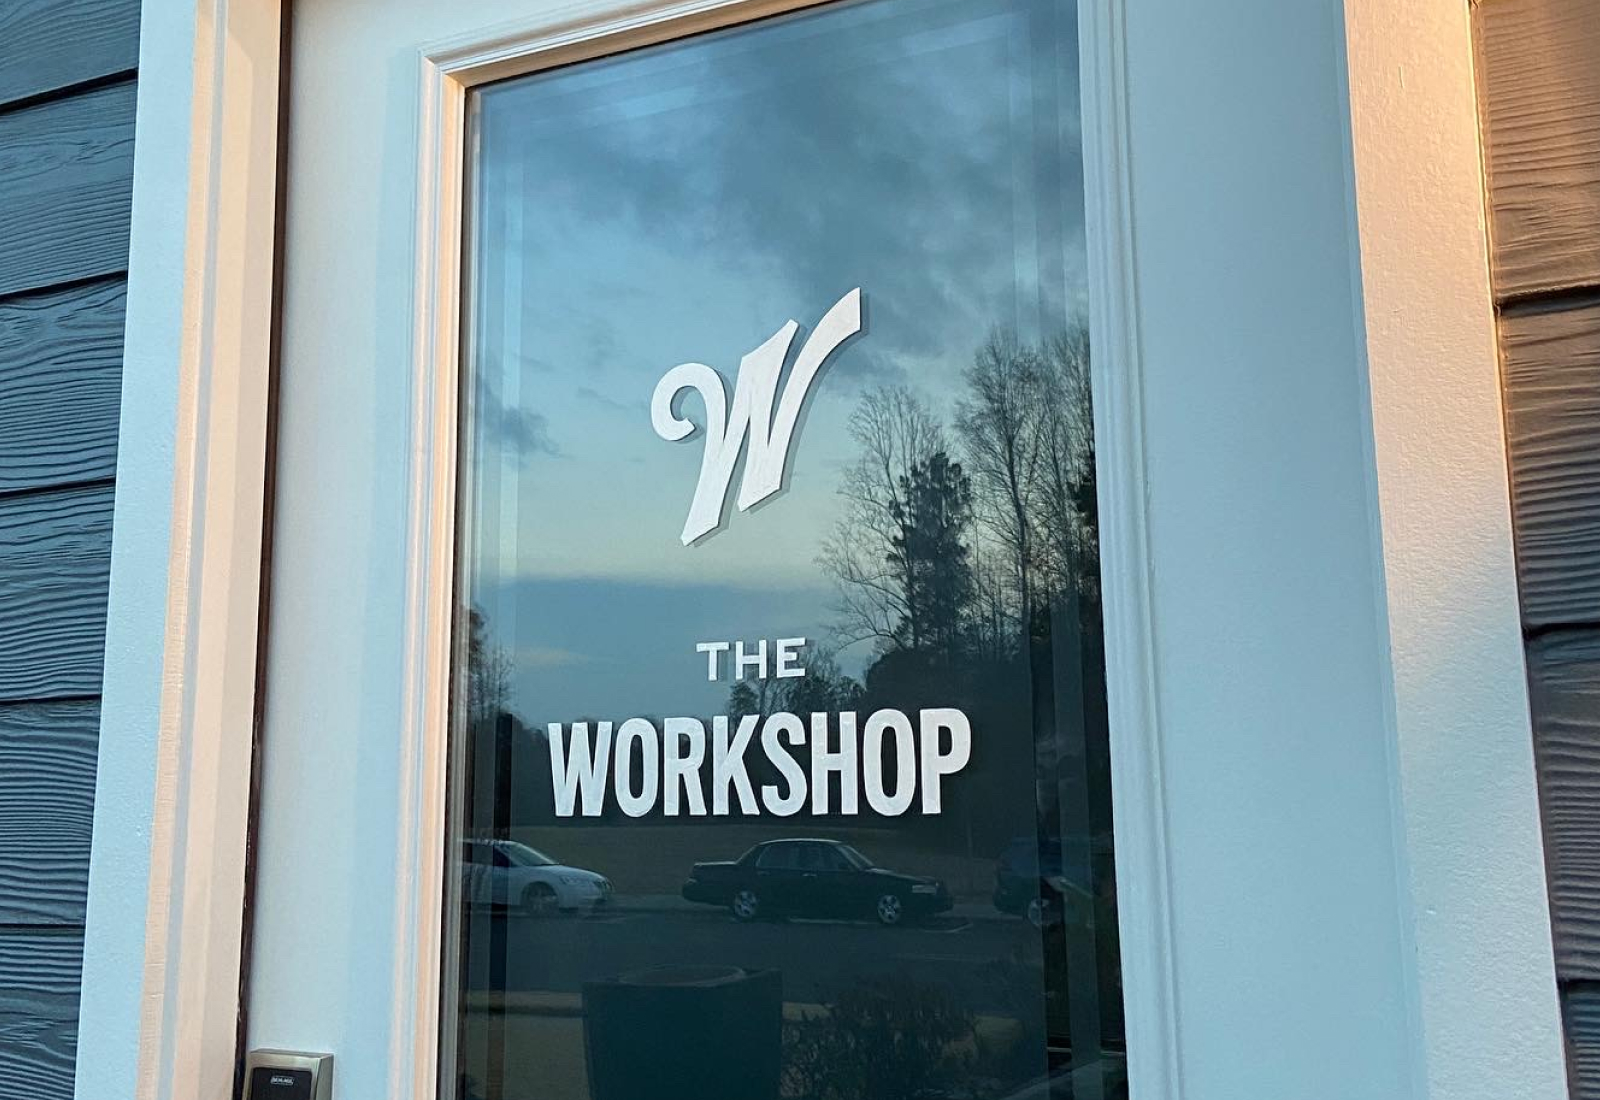 Workbench Roasters' The Workshop Door Signage | Hand Painted Sign by Joey Carty